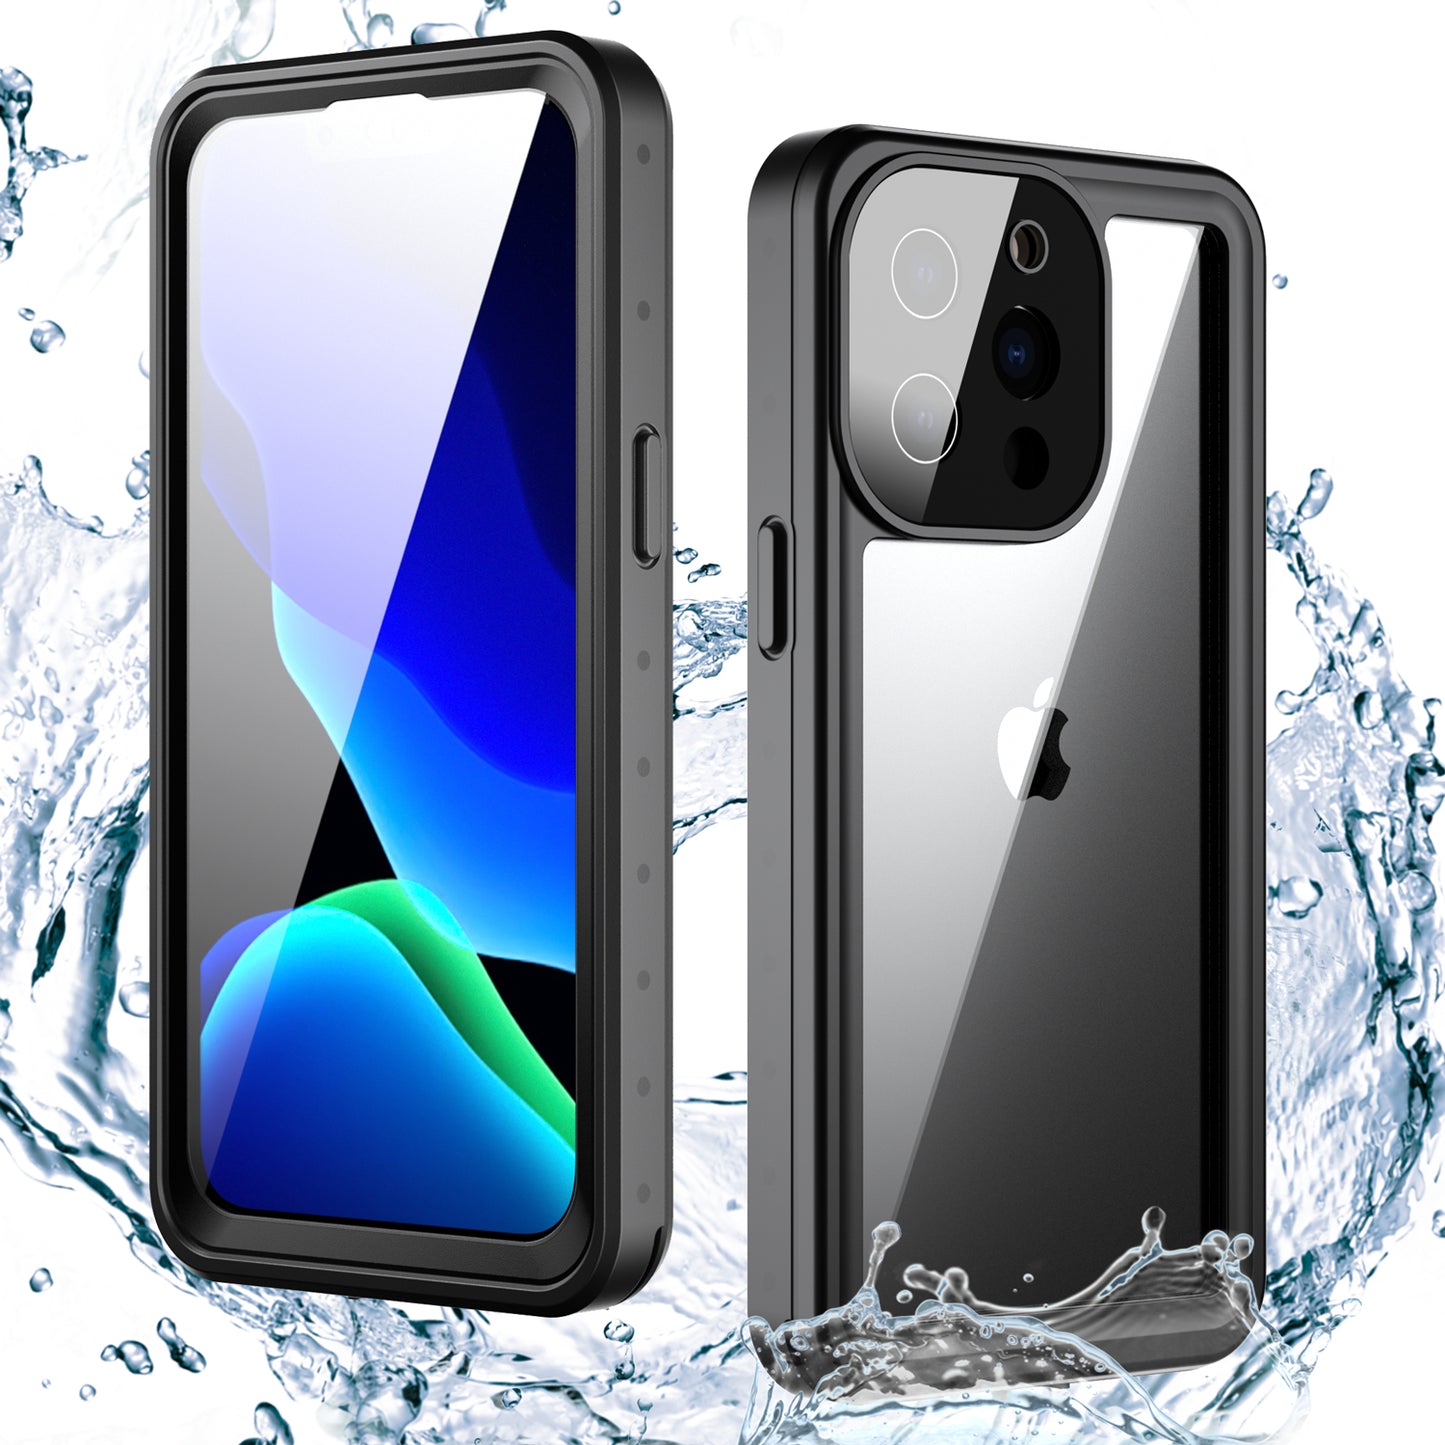 Apple iPhone 13 Pro Case Waterproof Submerged Underwater 6.6ft Clear Full Body Protective